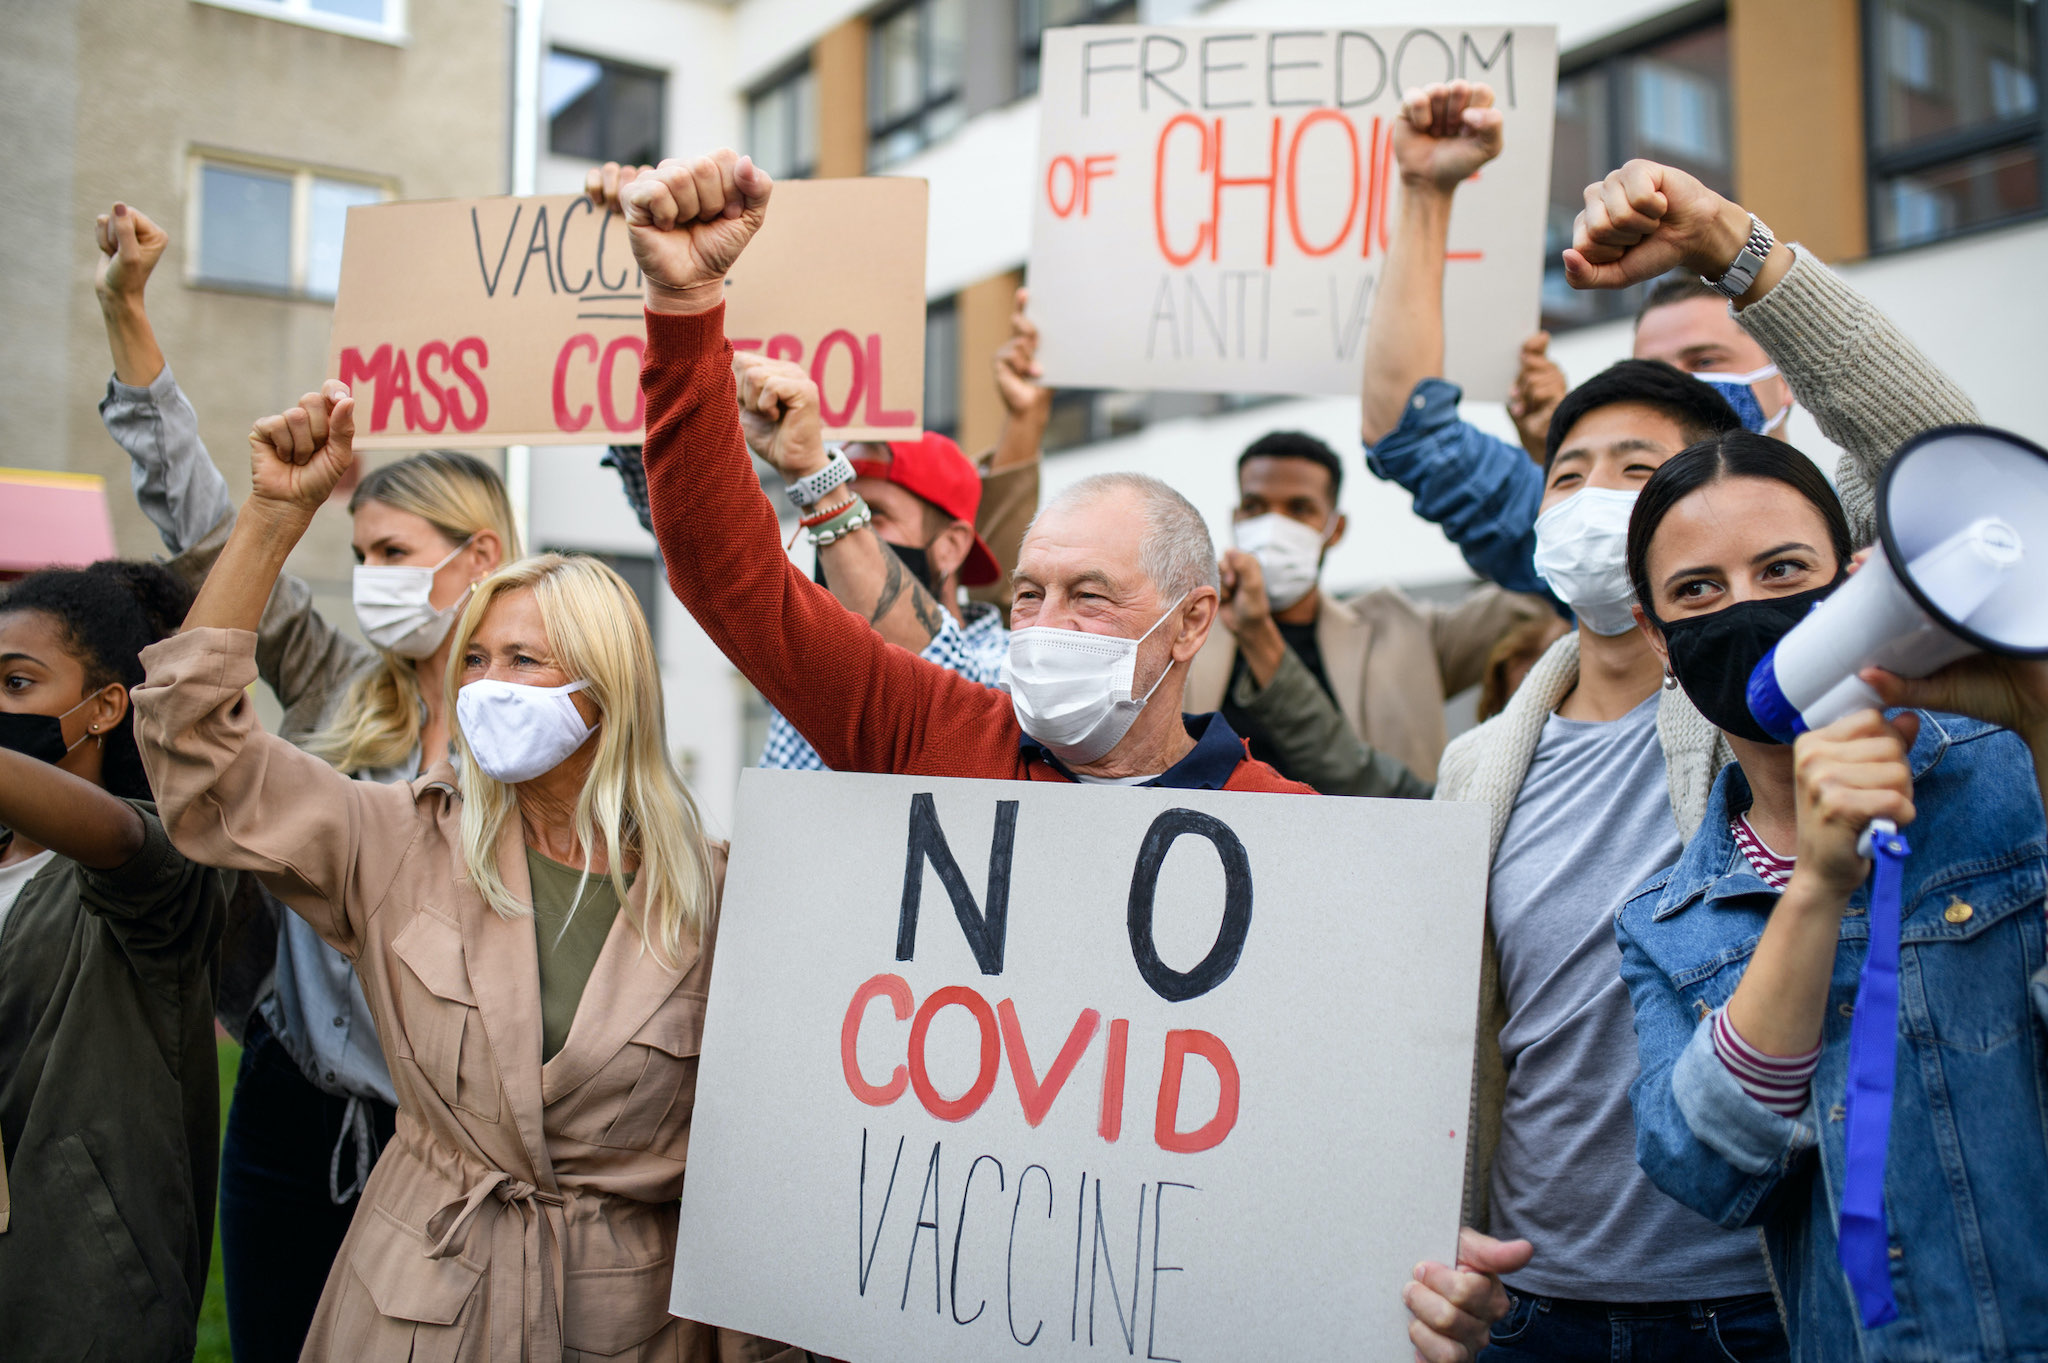 Crowd of people with placards and posters on public demonstration, no covid vaccine concept.